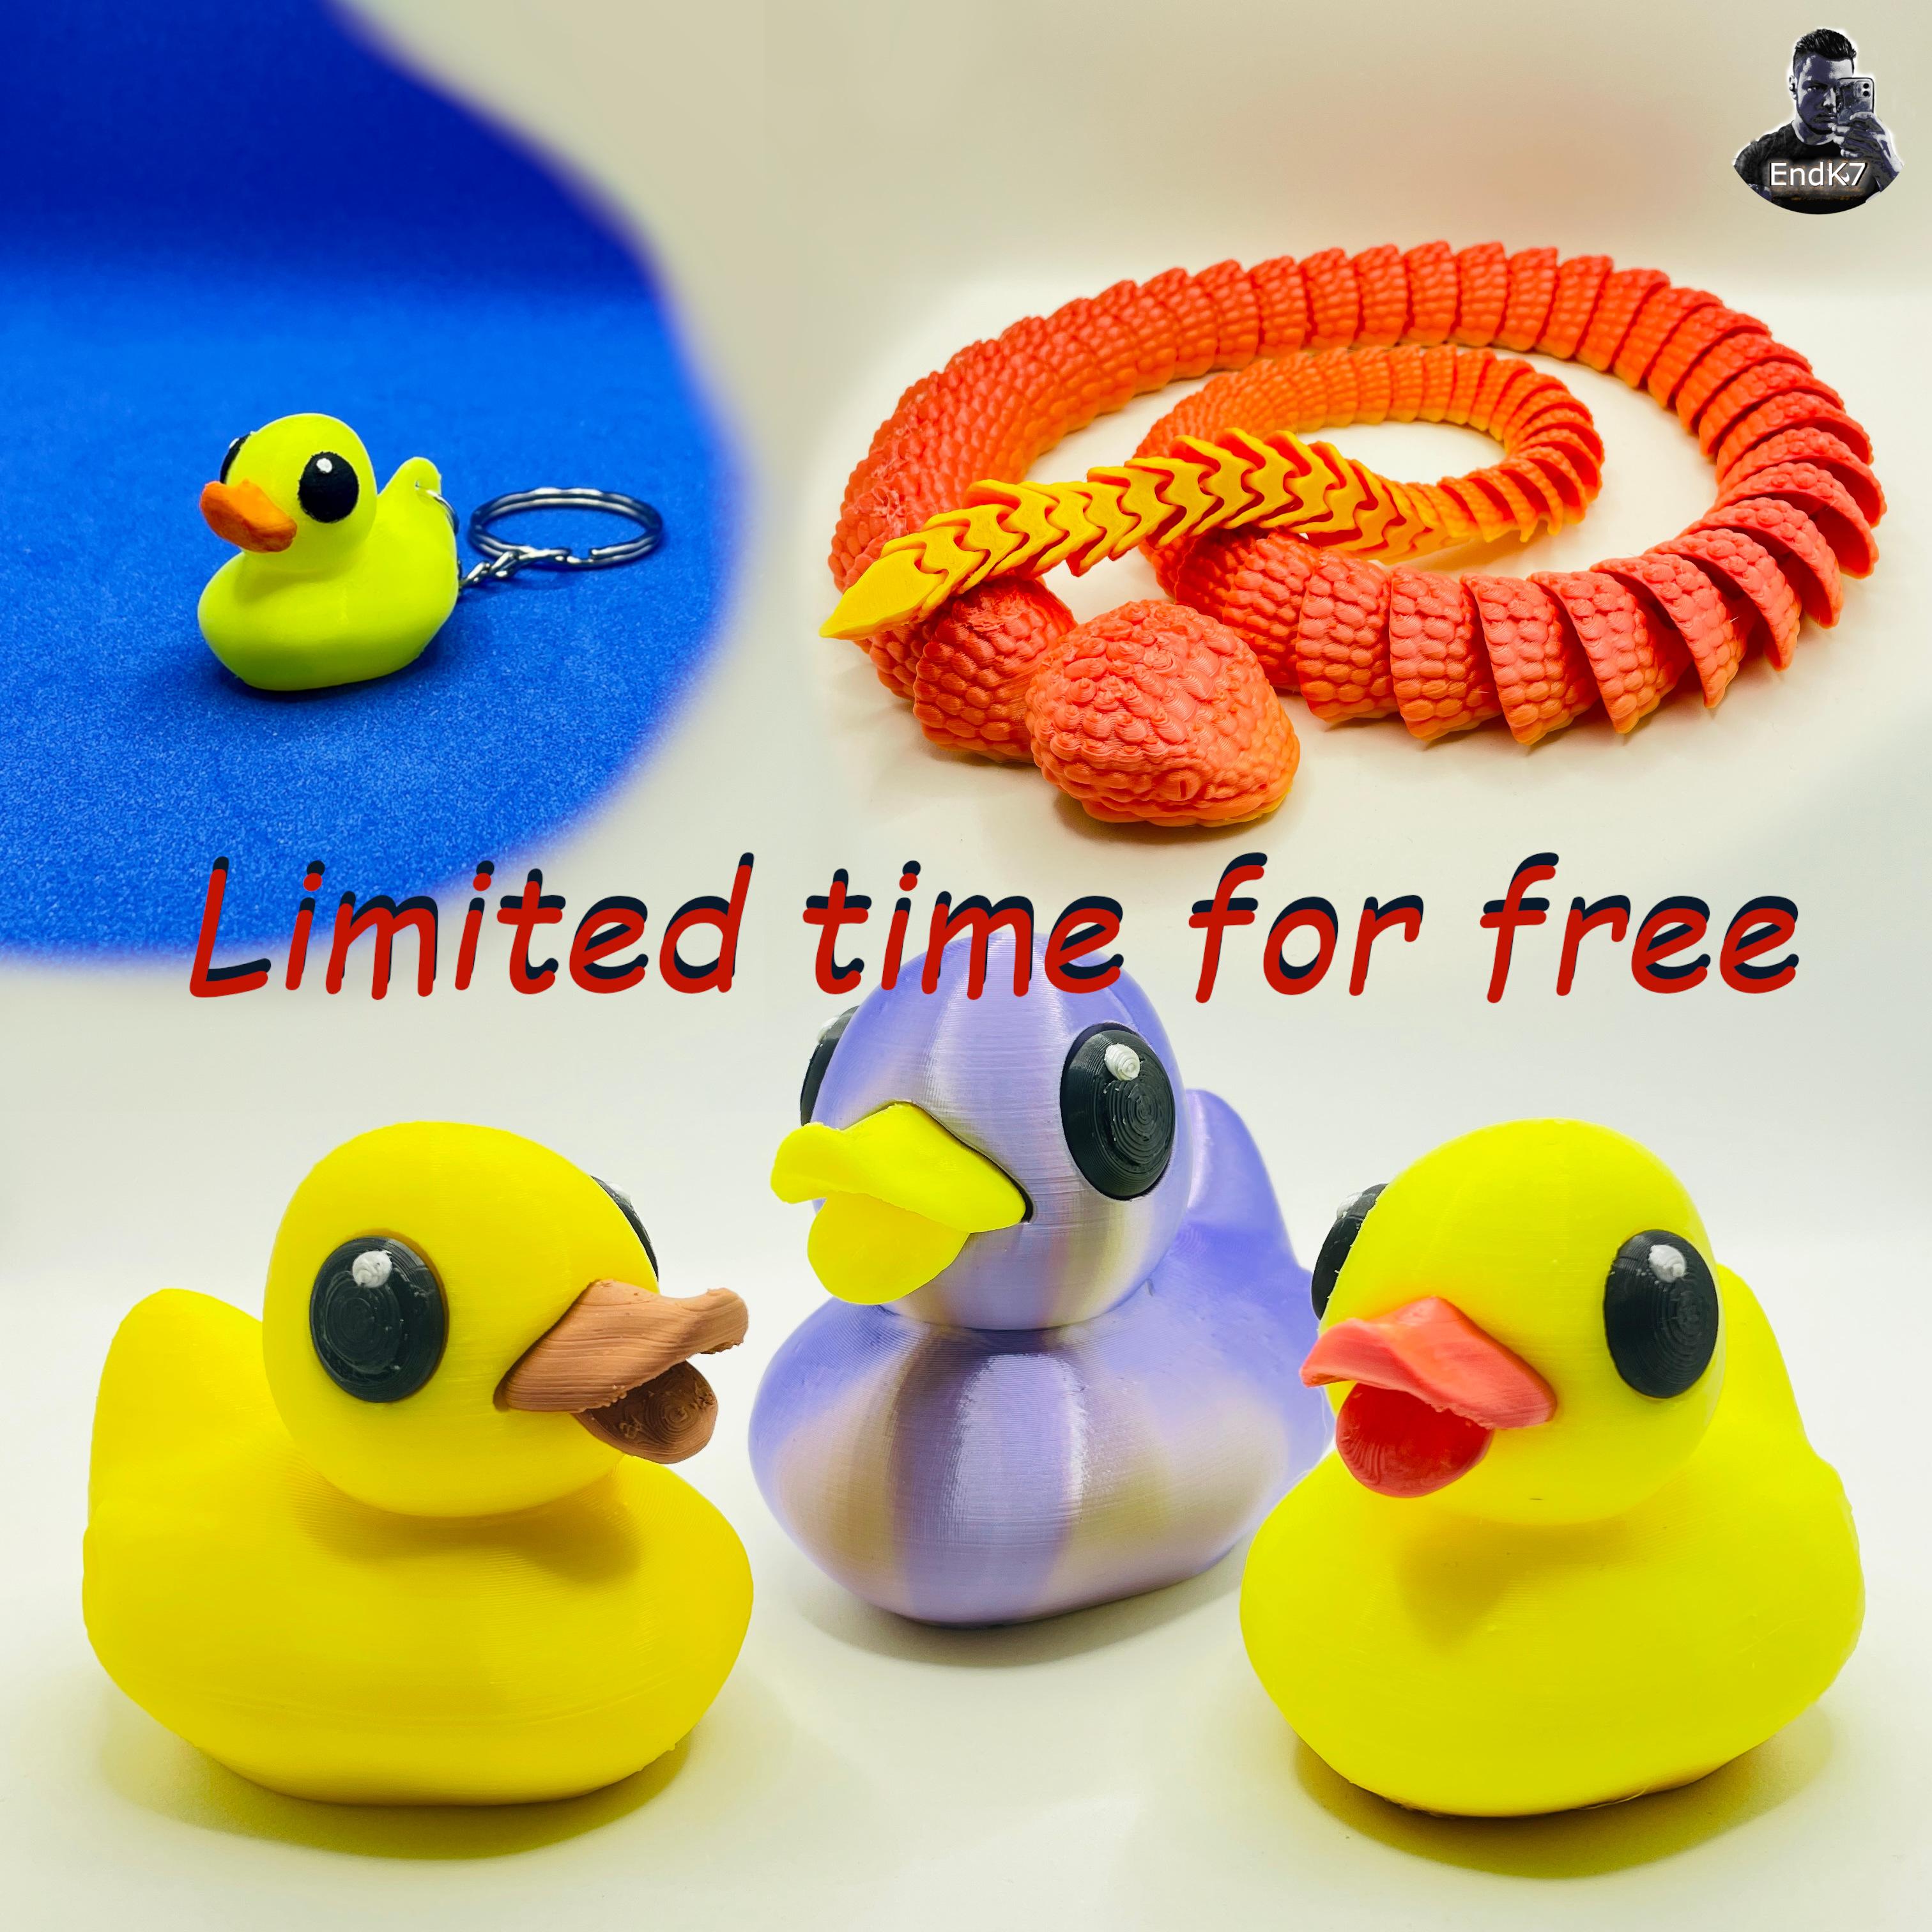 Limited time exclusive models available for free